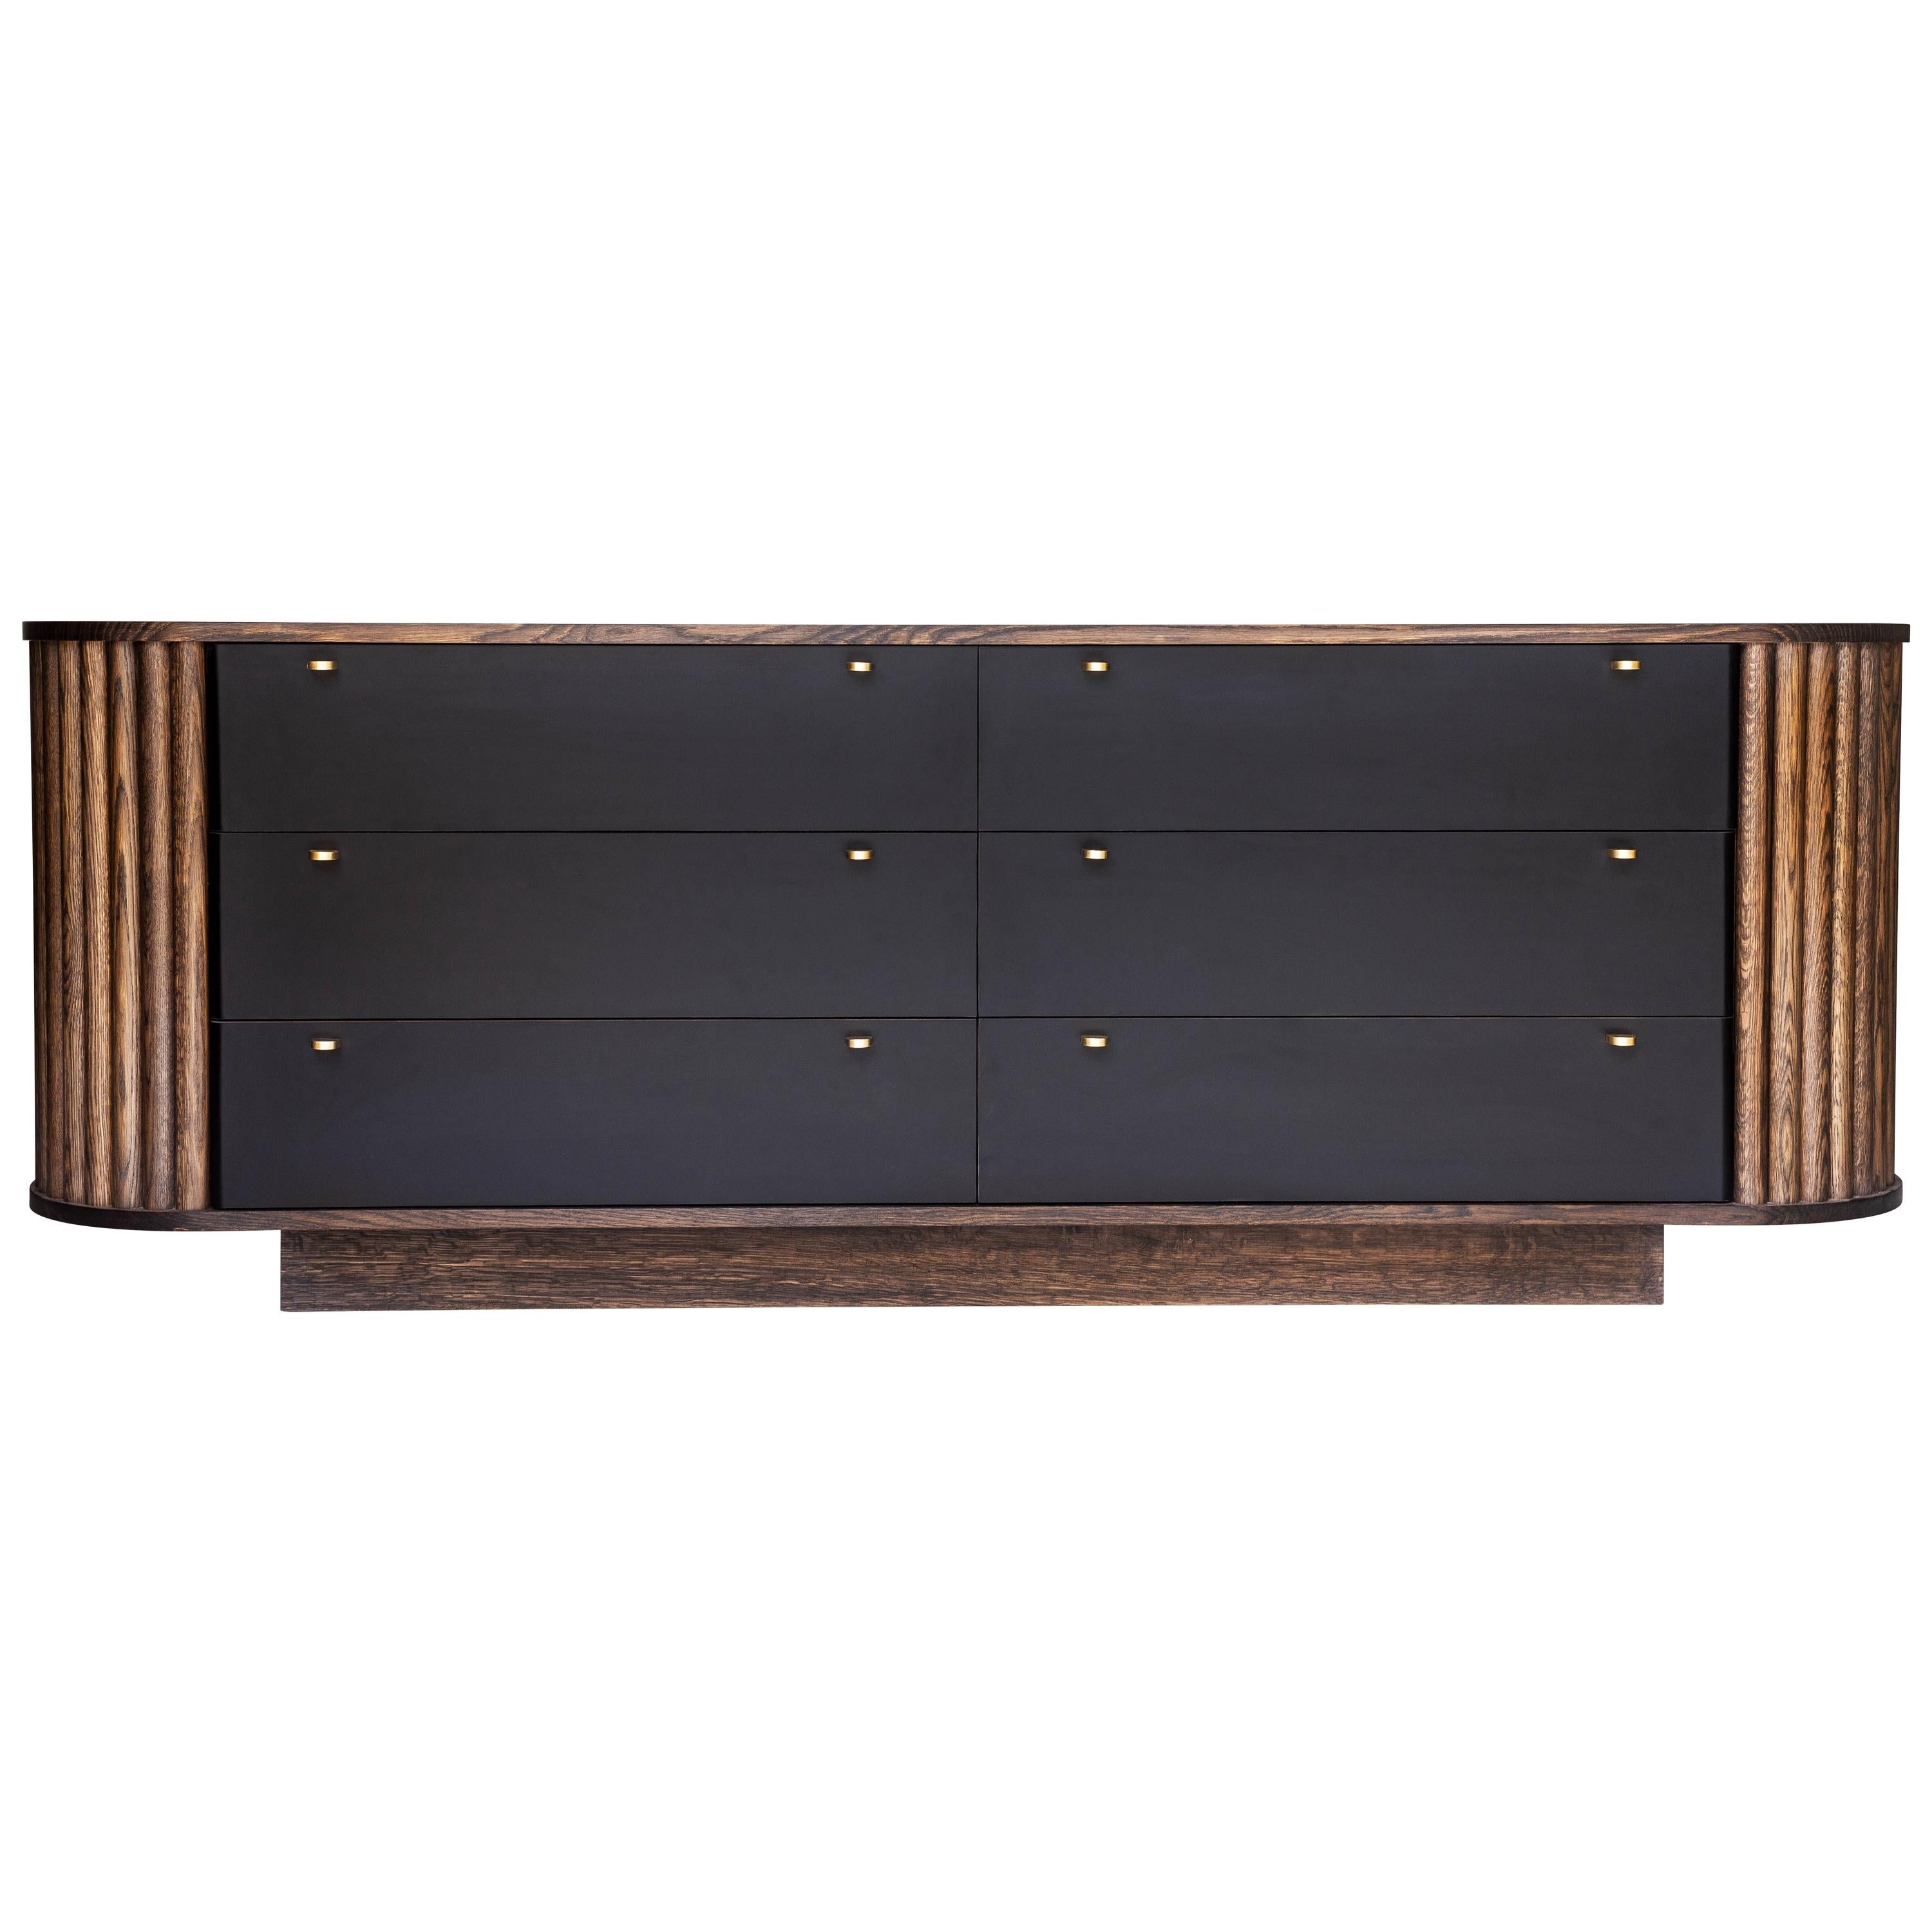 "Deborah Lea" Dresser / Credenza, with Leather and Brass accents by Kate Duncan 